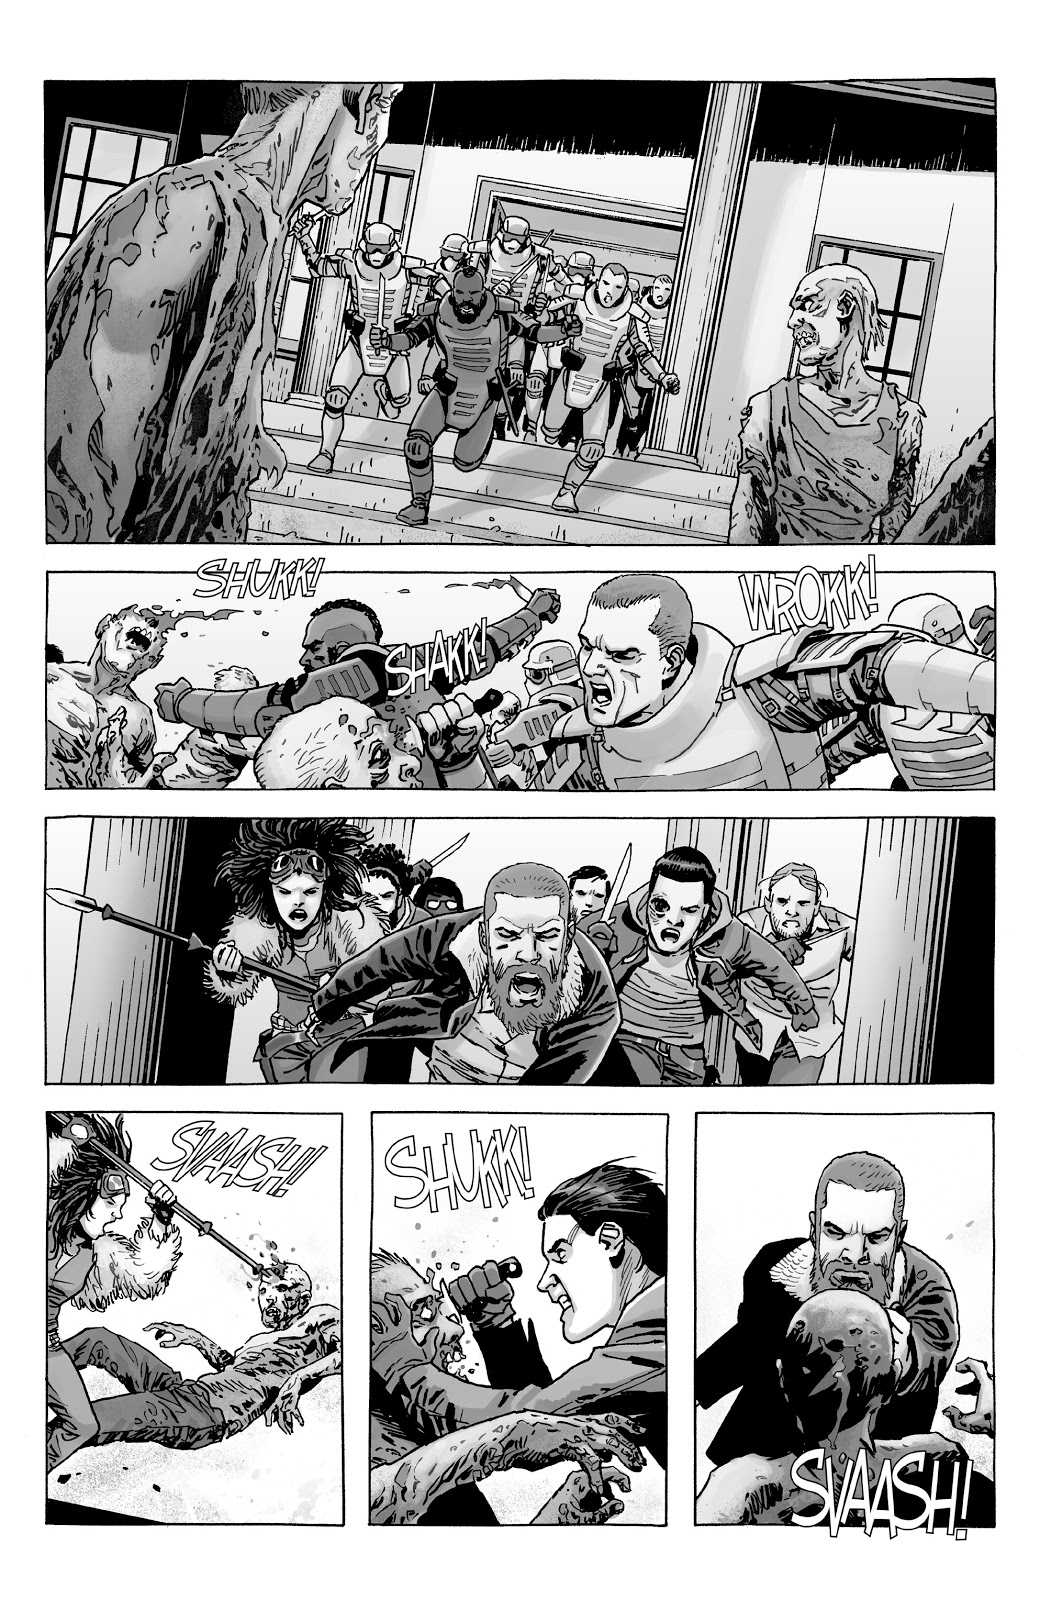 The Walking Dead Book 16 review